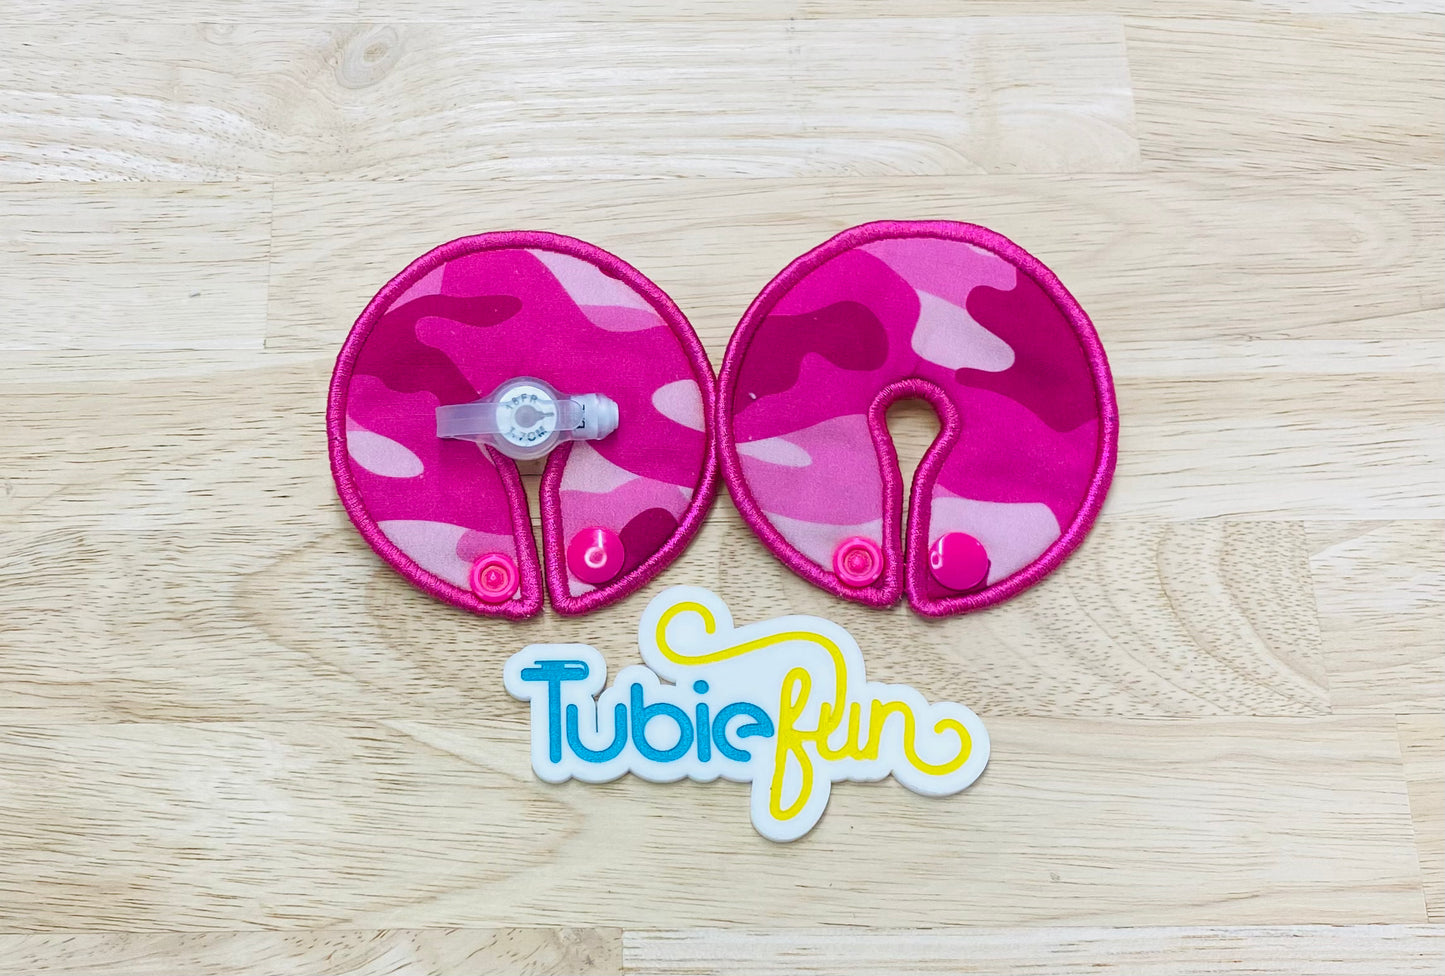 G-Tube Button Pad Cover Large - Pink Camo